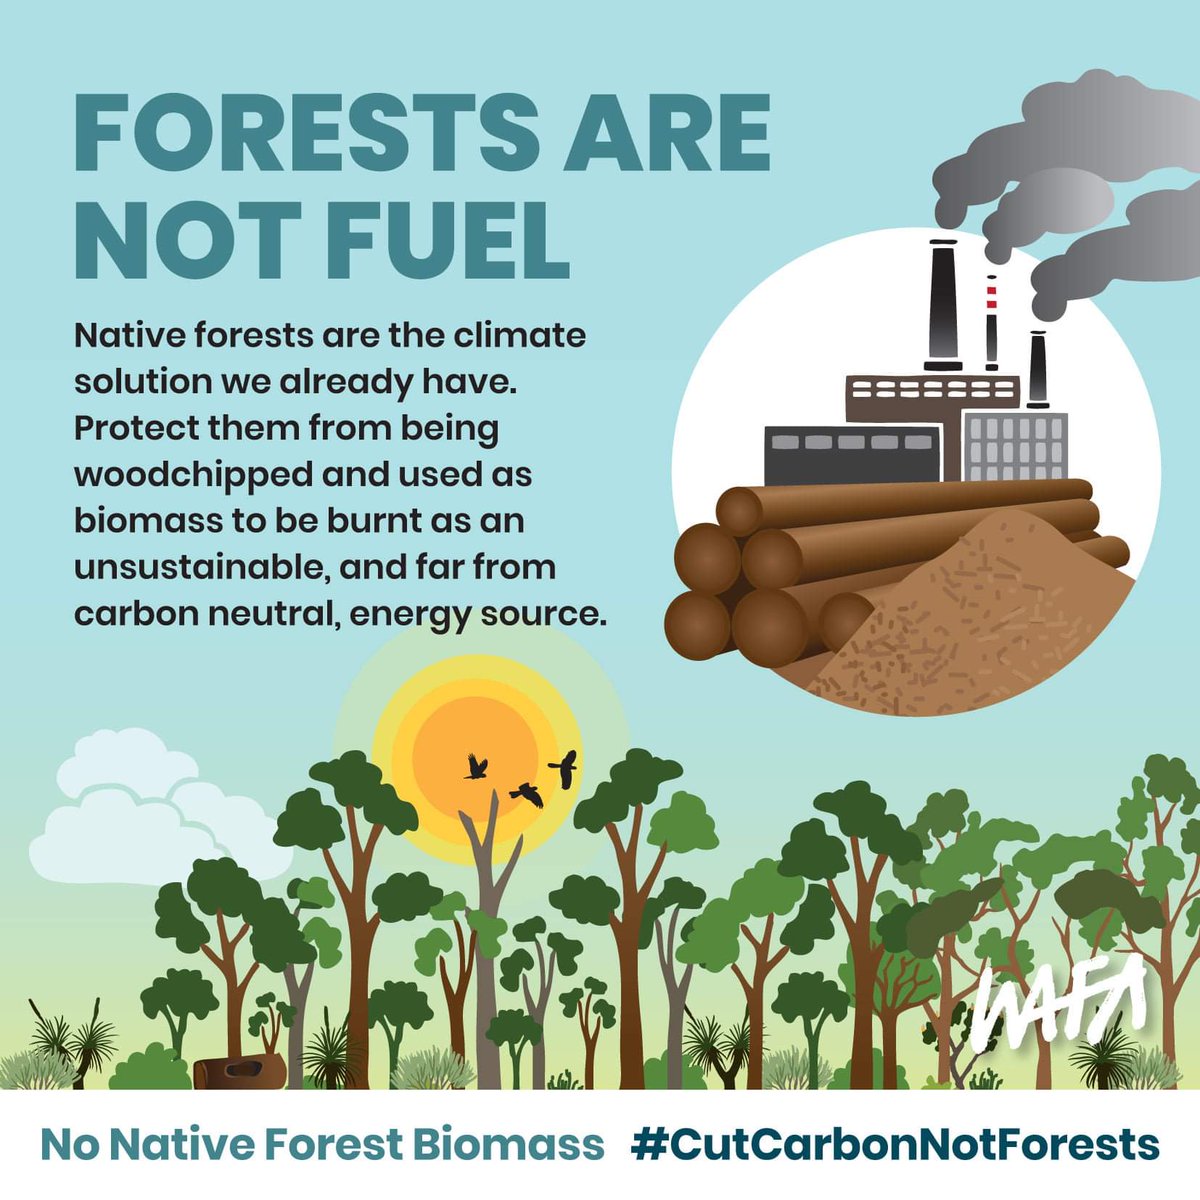 #BigBadBiomass 

Cutting down forests to burn for energy is not renewable, green or a climate solution. It's a climate disaster.